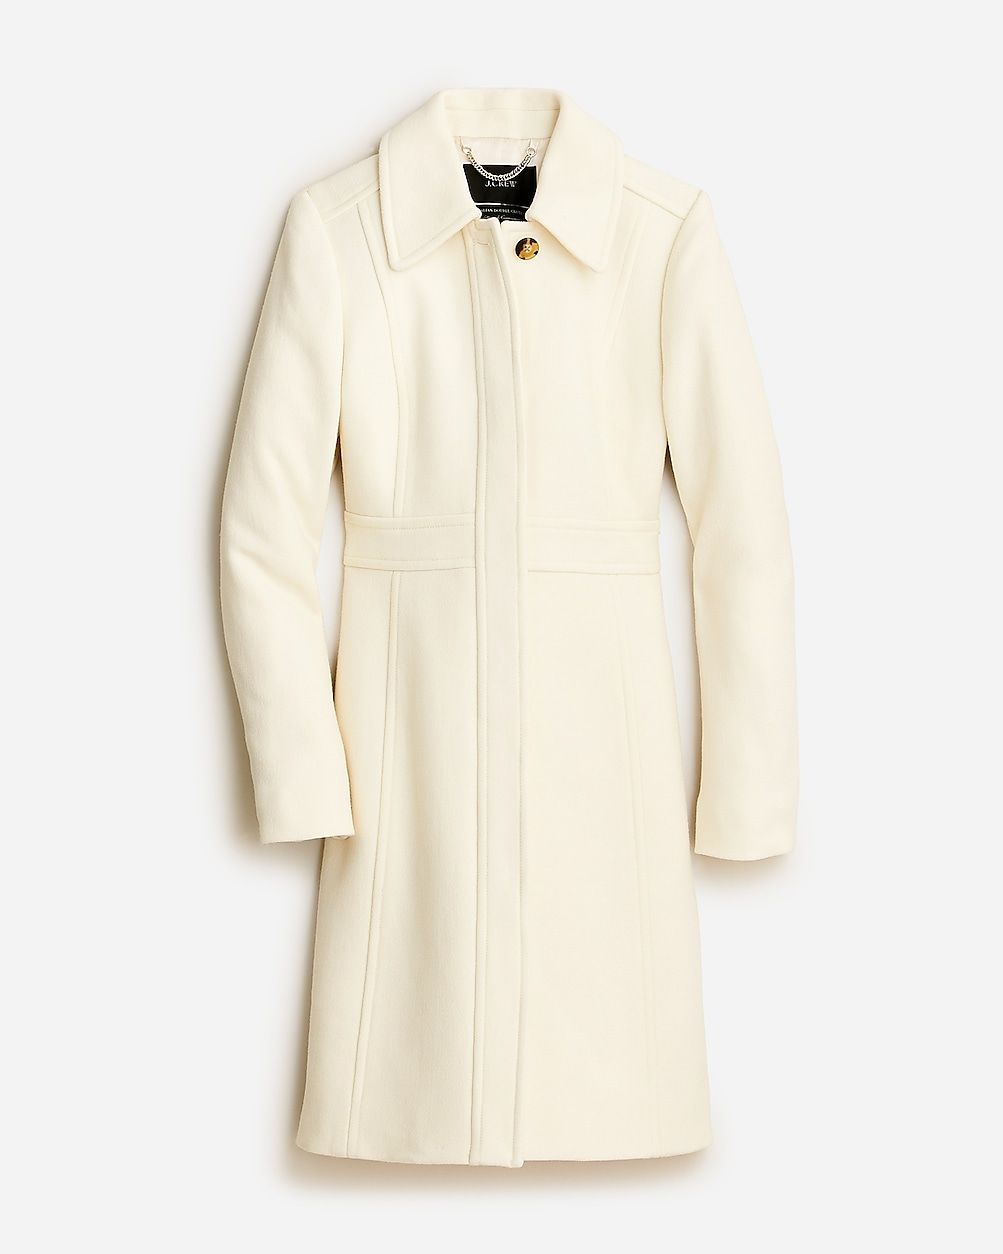 Petite new lady day topcoat in Italian double-cloth wool blend | J.Crew US